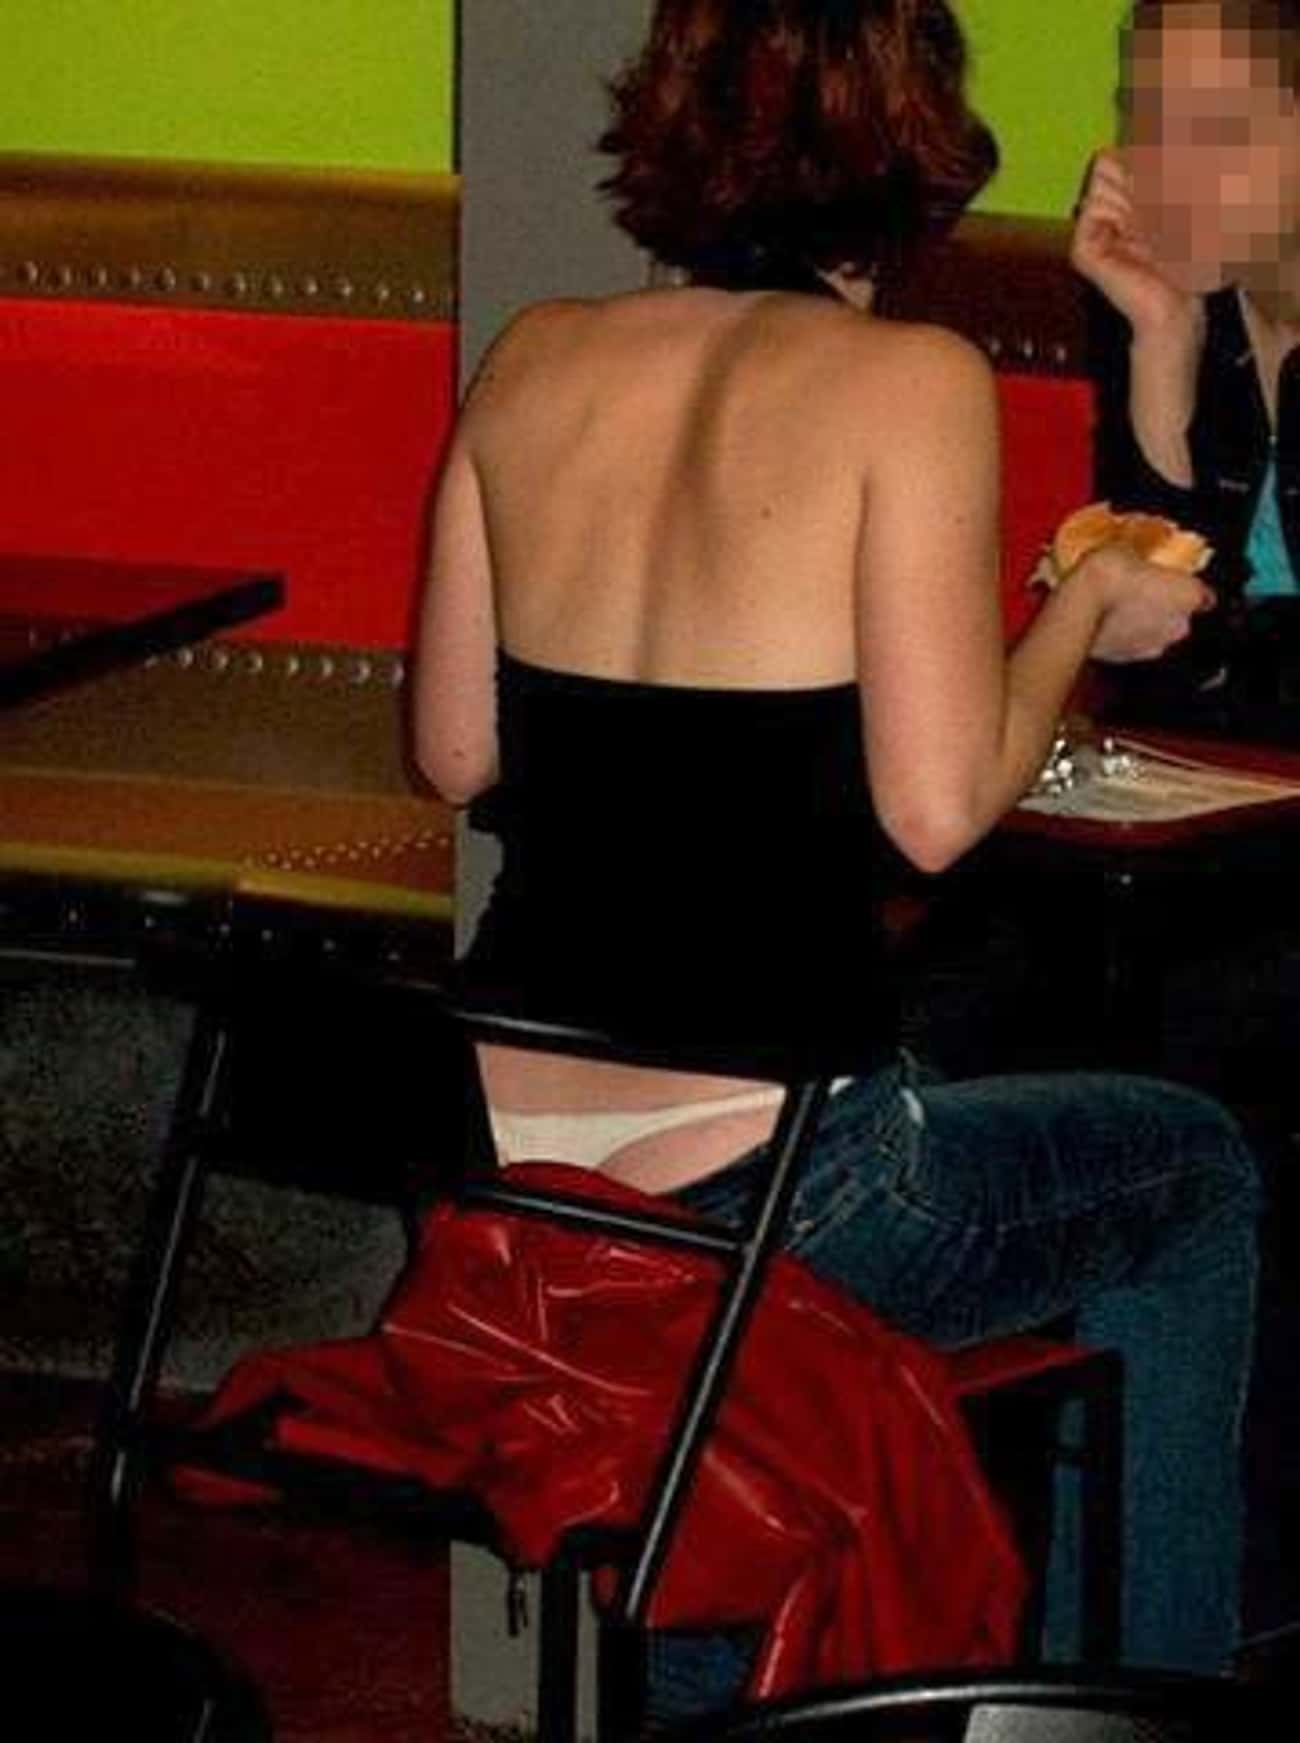 Low-Rise Jeans with a Thong Exposed